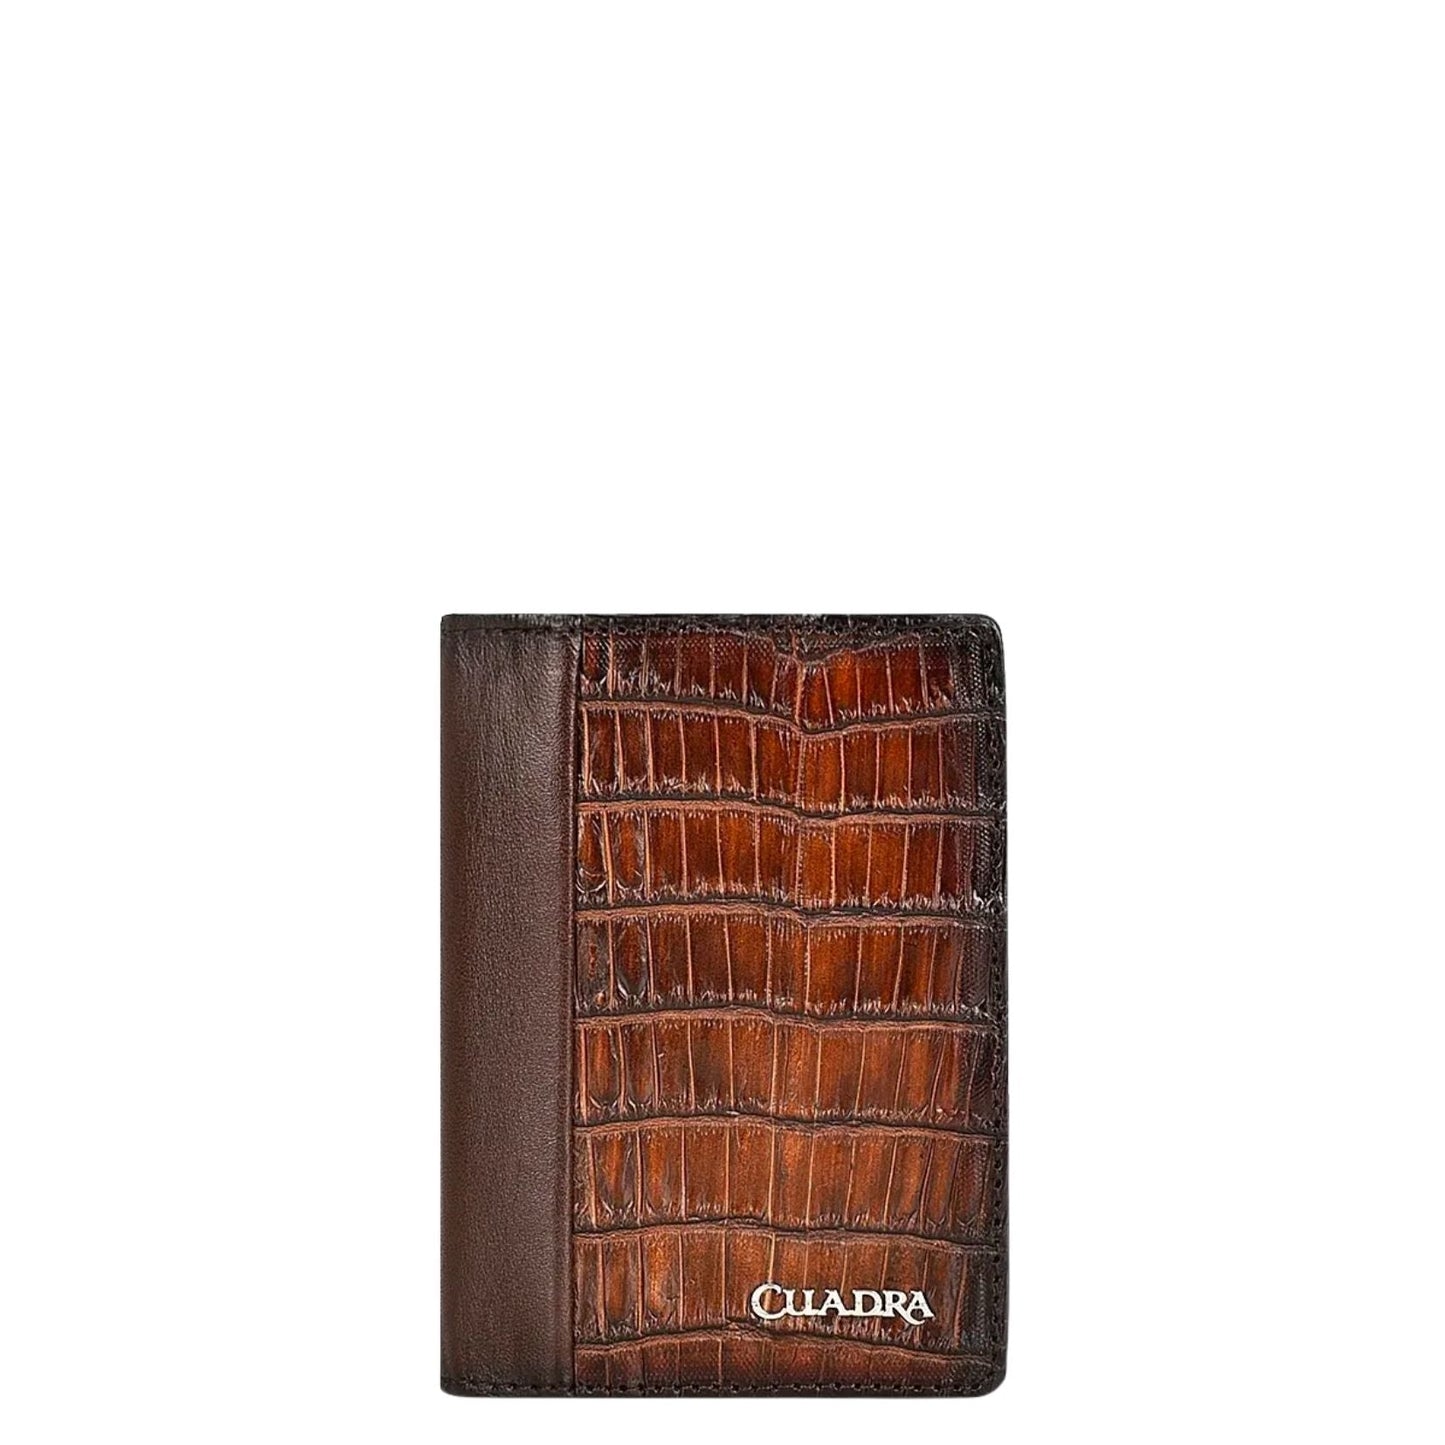 BC011NL - Cuadra maple exotic wallet in niloticus leather for men-Kuet.us